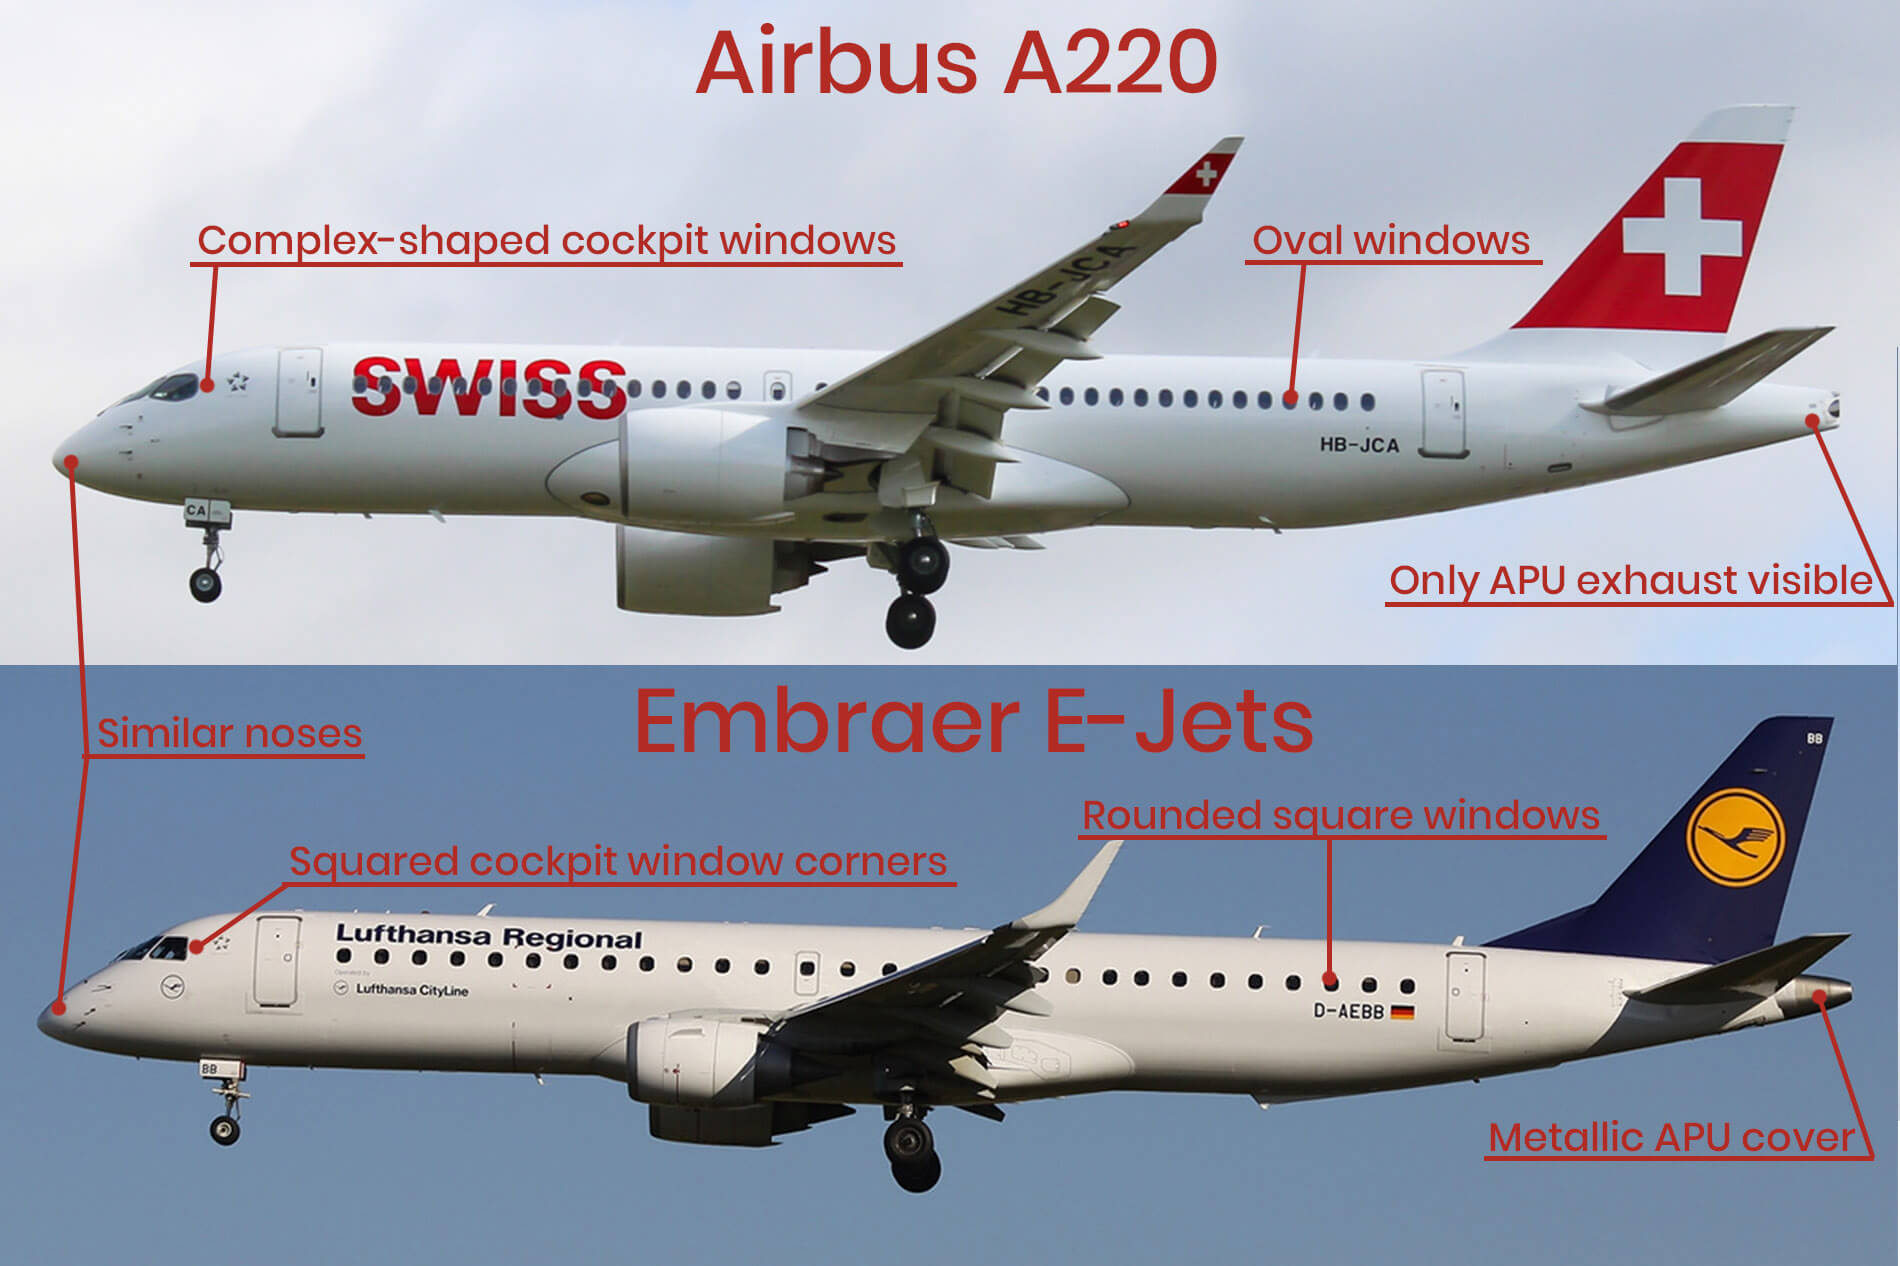 Airbus A220 Embraer E-Jets spotting guide